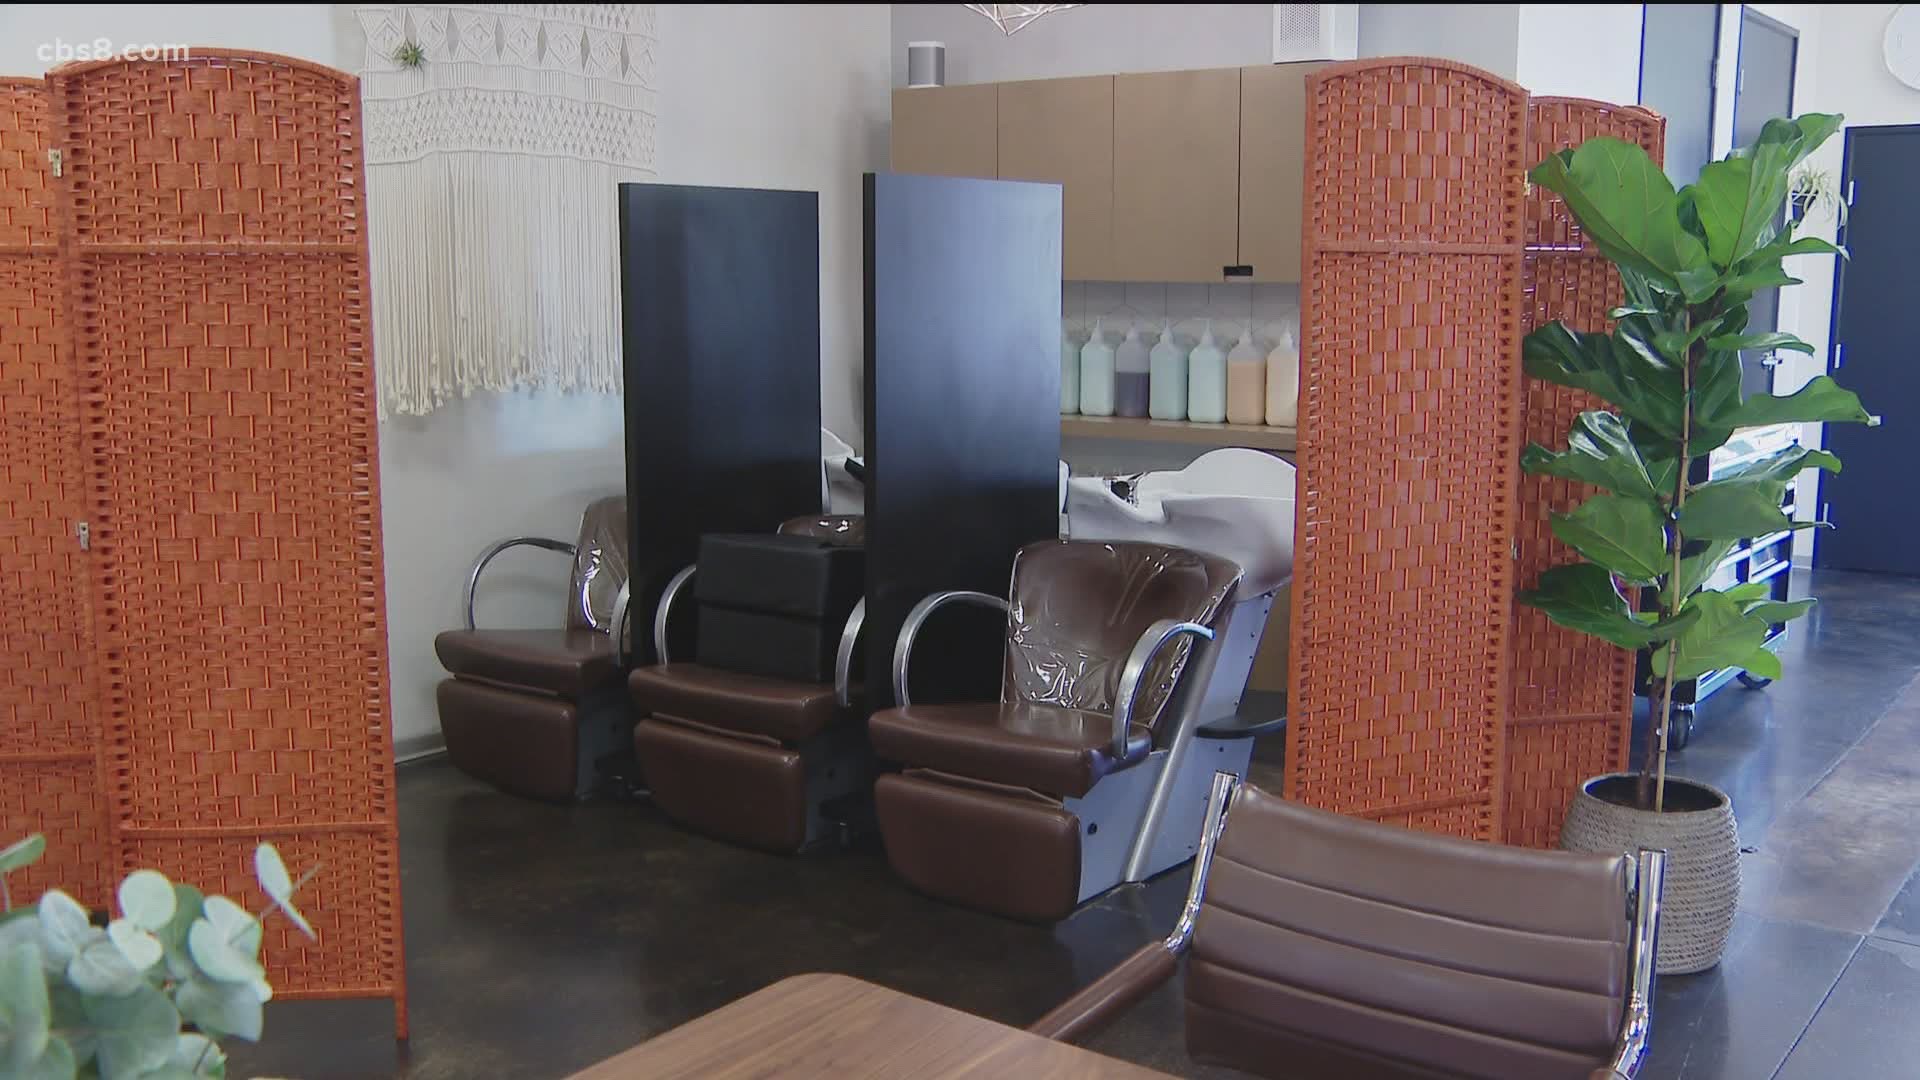 News 8's Abbie Alford reports from Carlsbad on the snag hair salons are facing moving to the streets to do business.